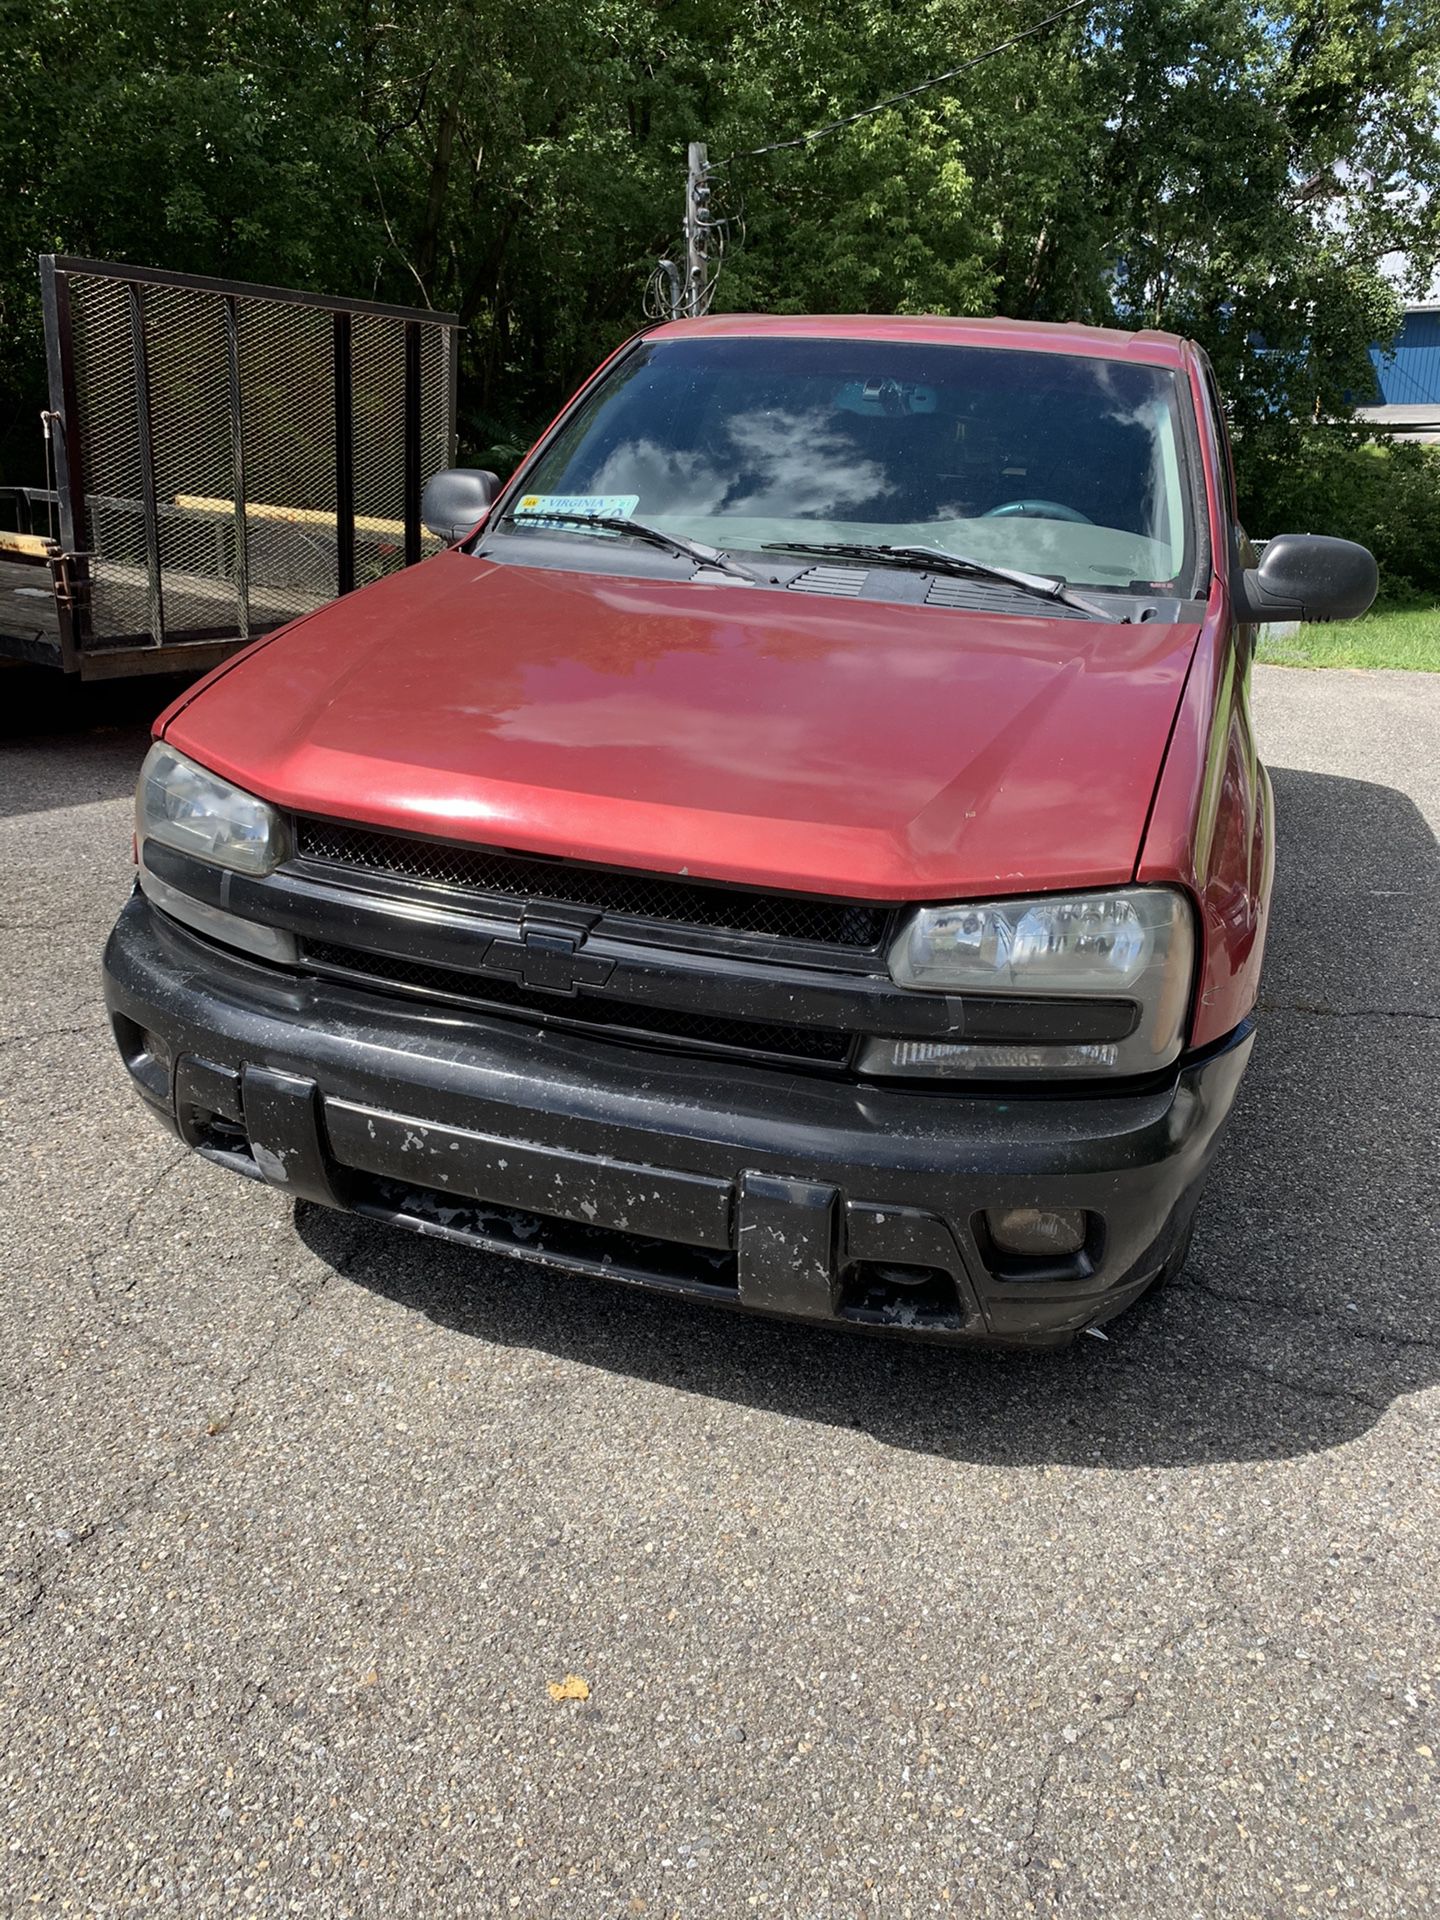 2002 Chevy trailblazer FOR Parts only. And 2005